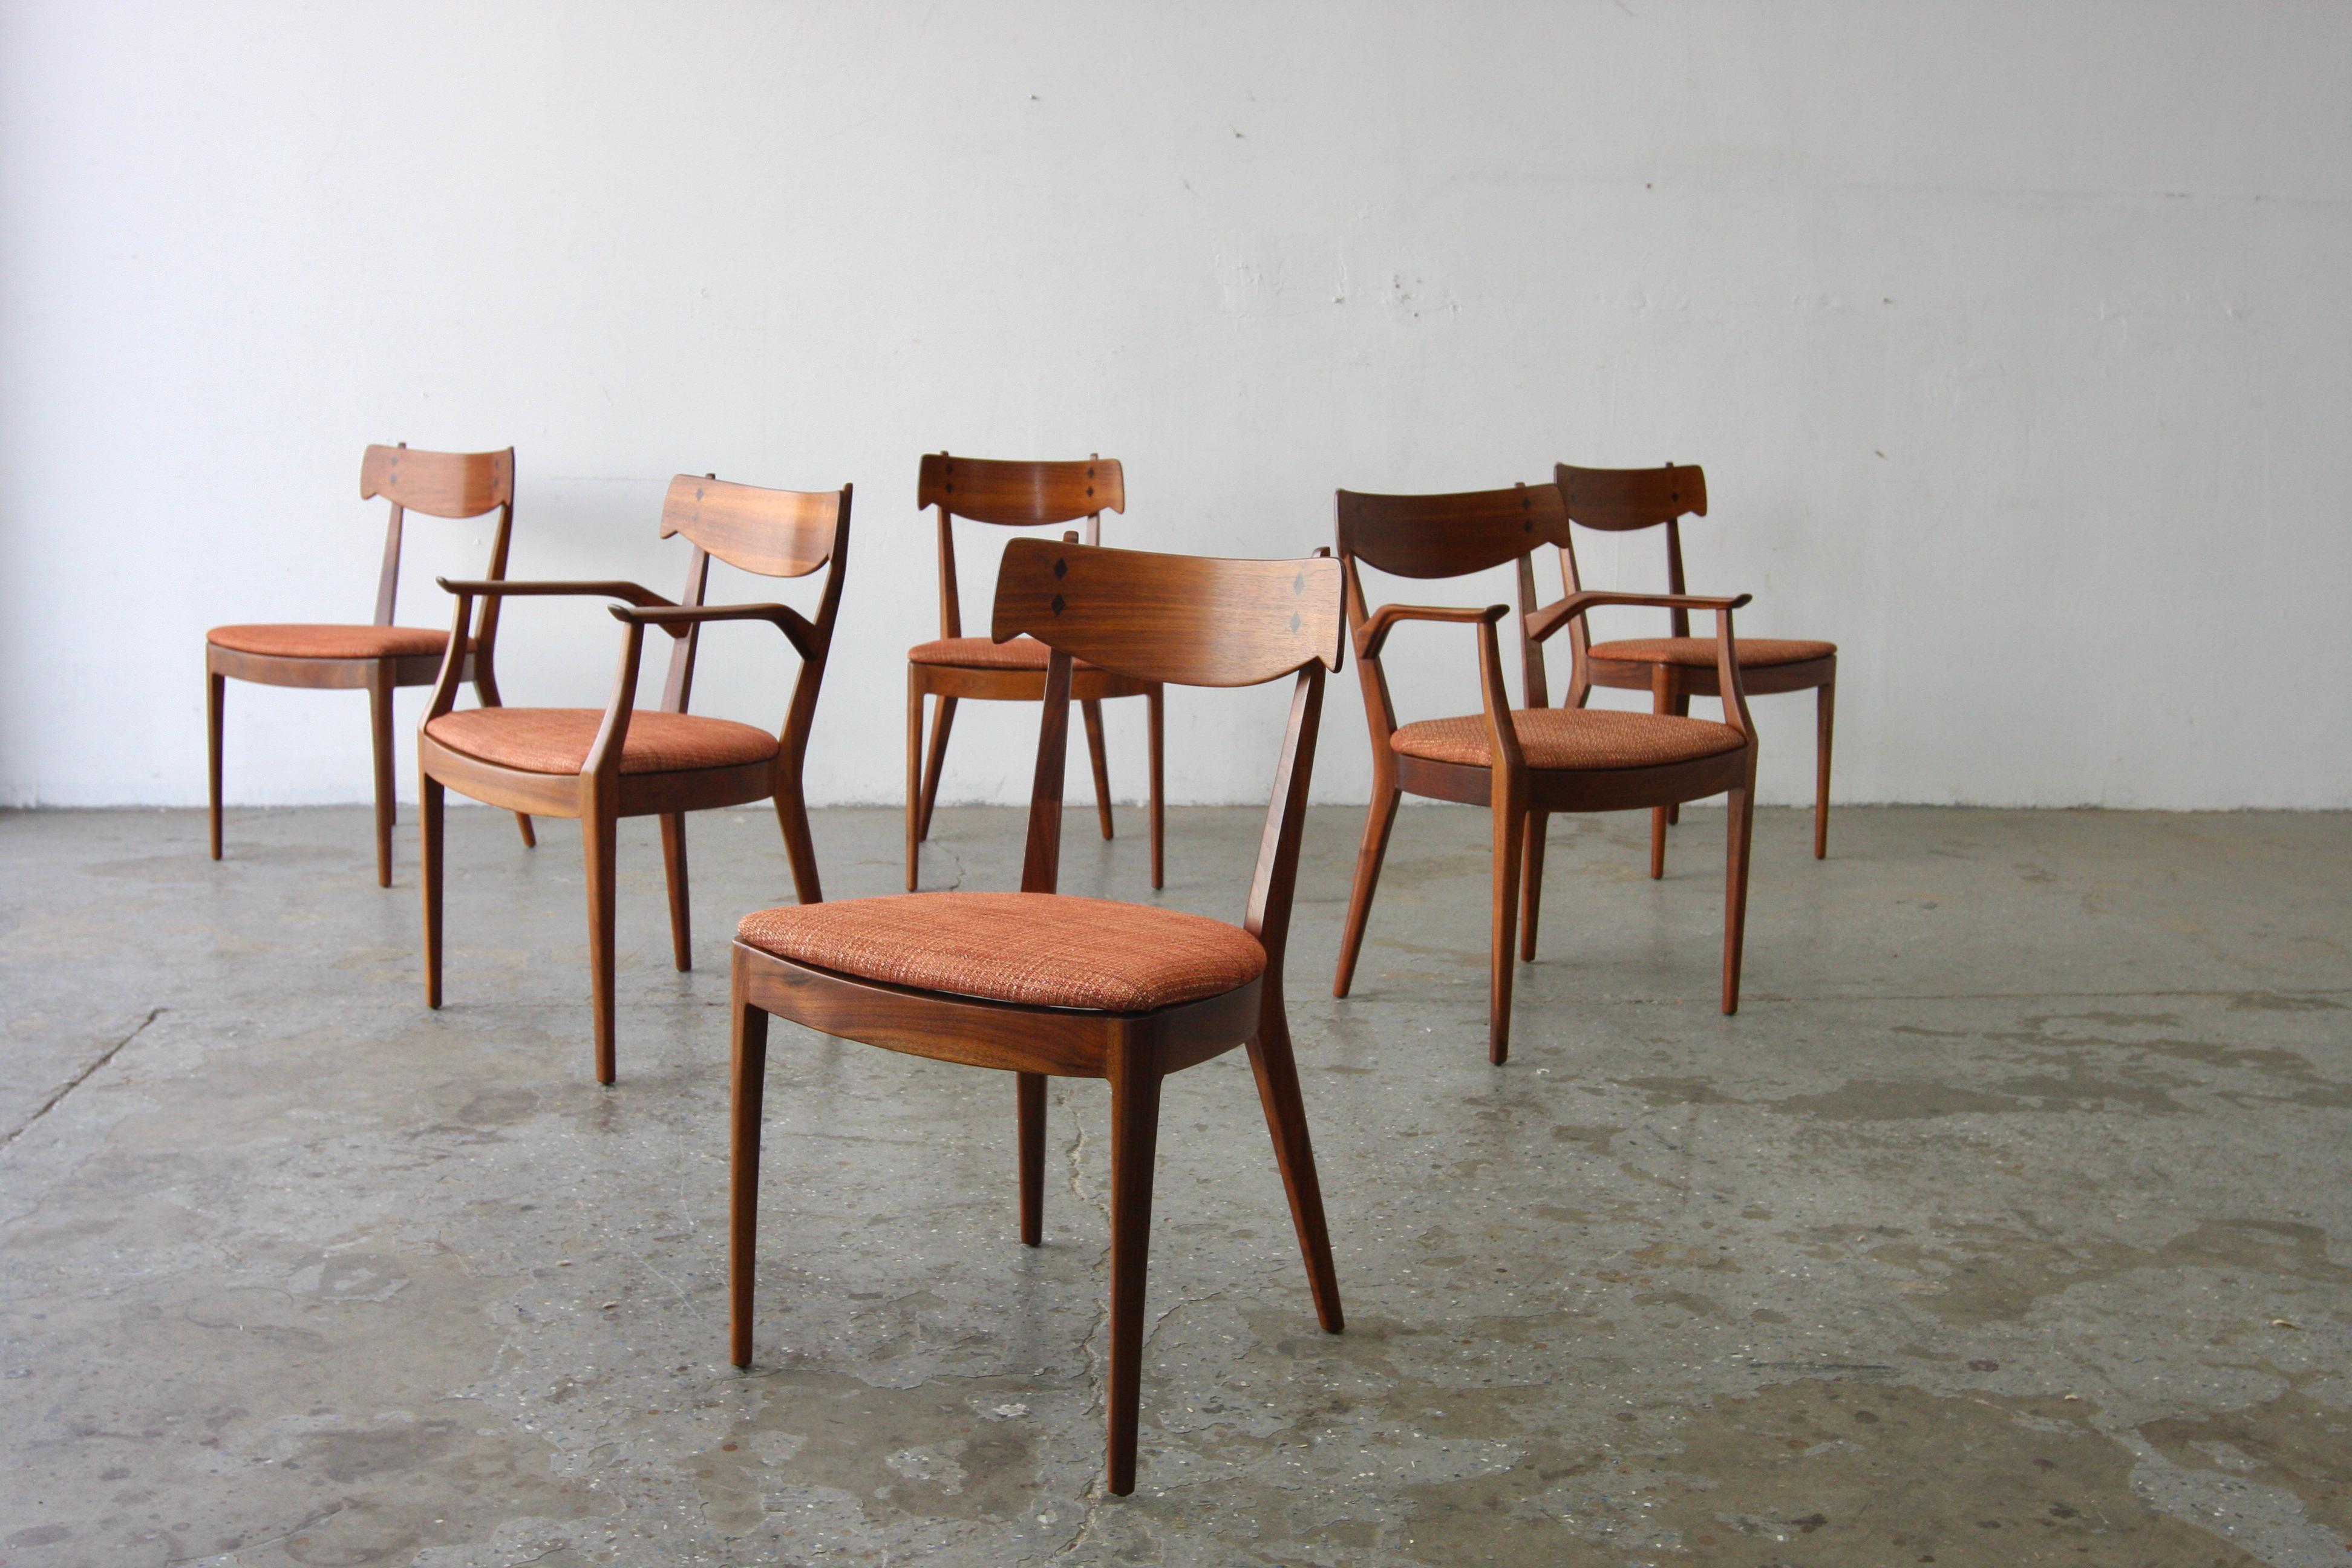 These dining chairs are Designed by Stewart MacDougall and Kipp Stewart. Part of Drexel Furniture's 